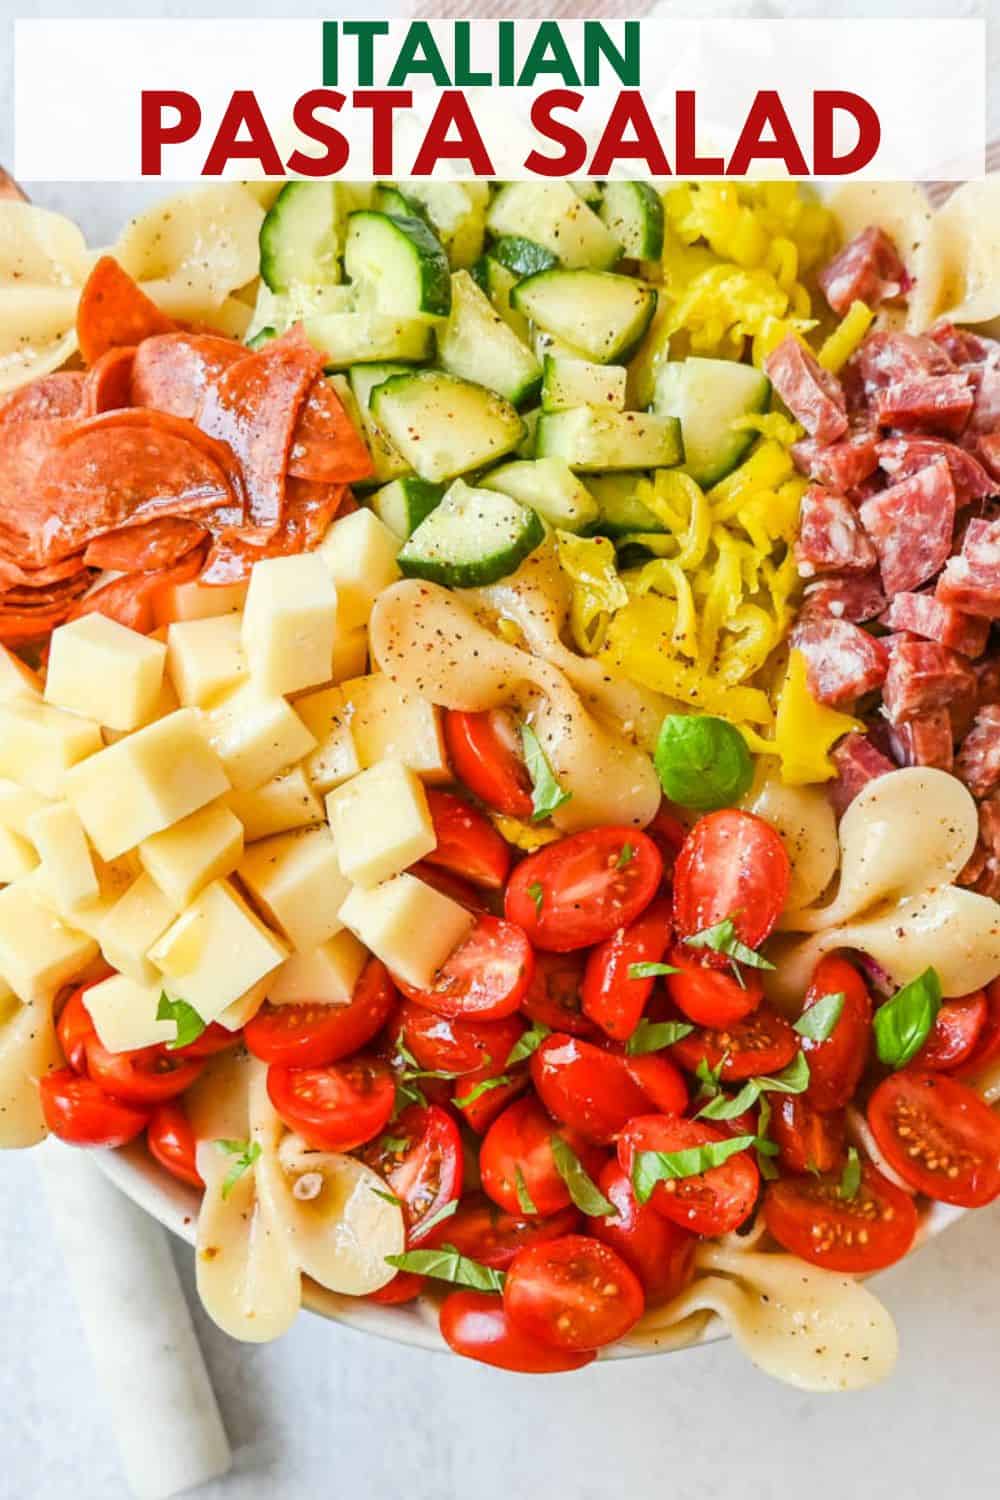 How to make the best pasta salad with Italian meats, cheese, pasta, and vegetables, all tossed with a homemade creamy red wine vinaigrette. This is such an easy, popular pasta salad recipe.